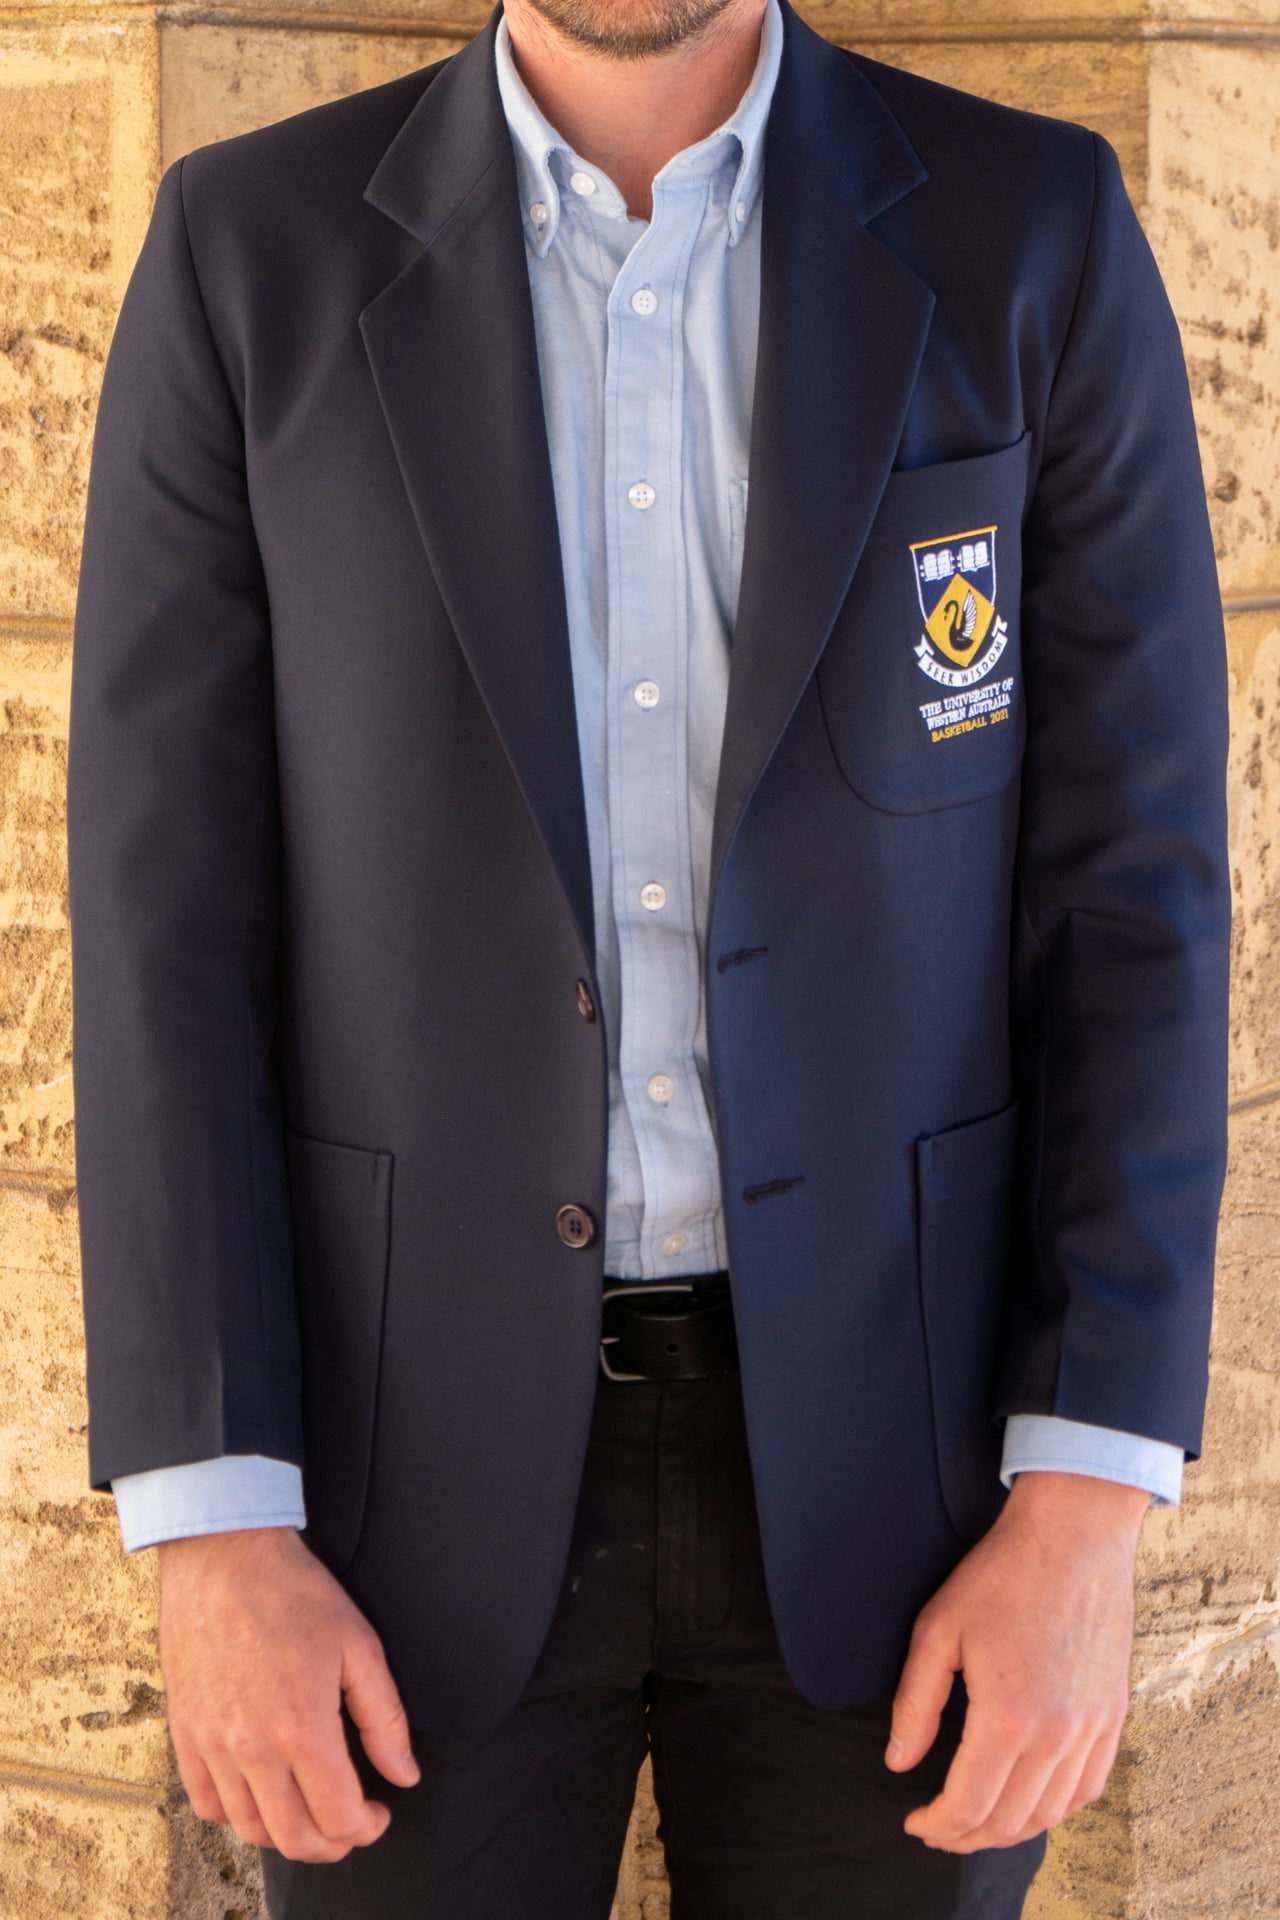 A front view of a man wearing the UWA Blues Blazer unbuttoned.